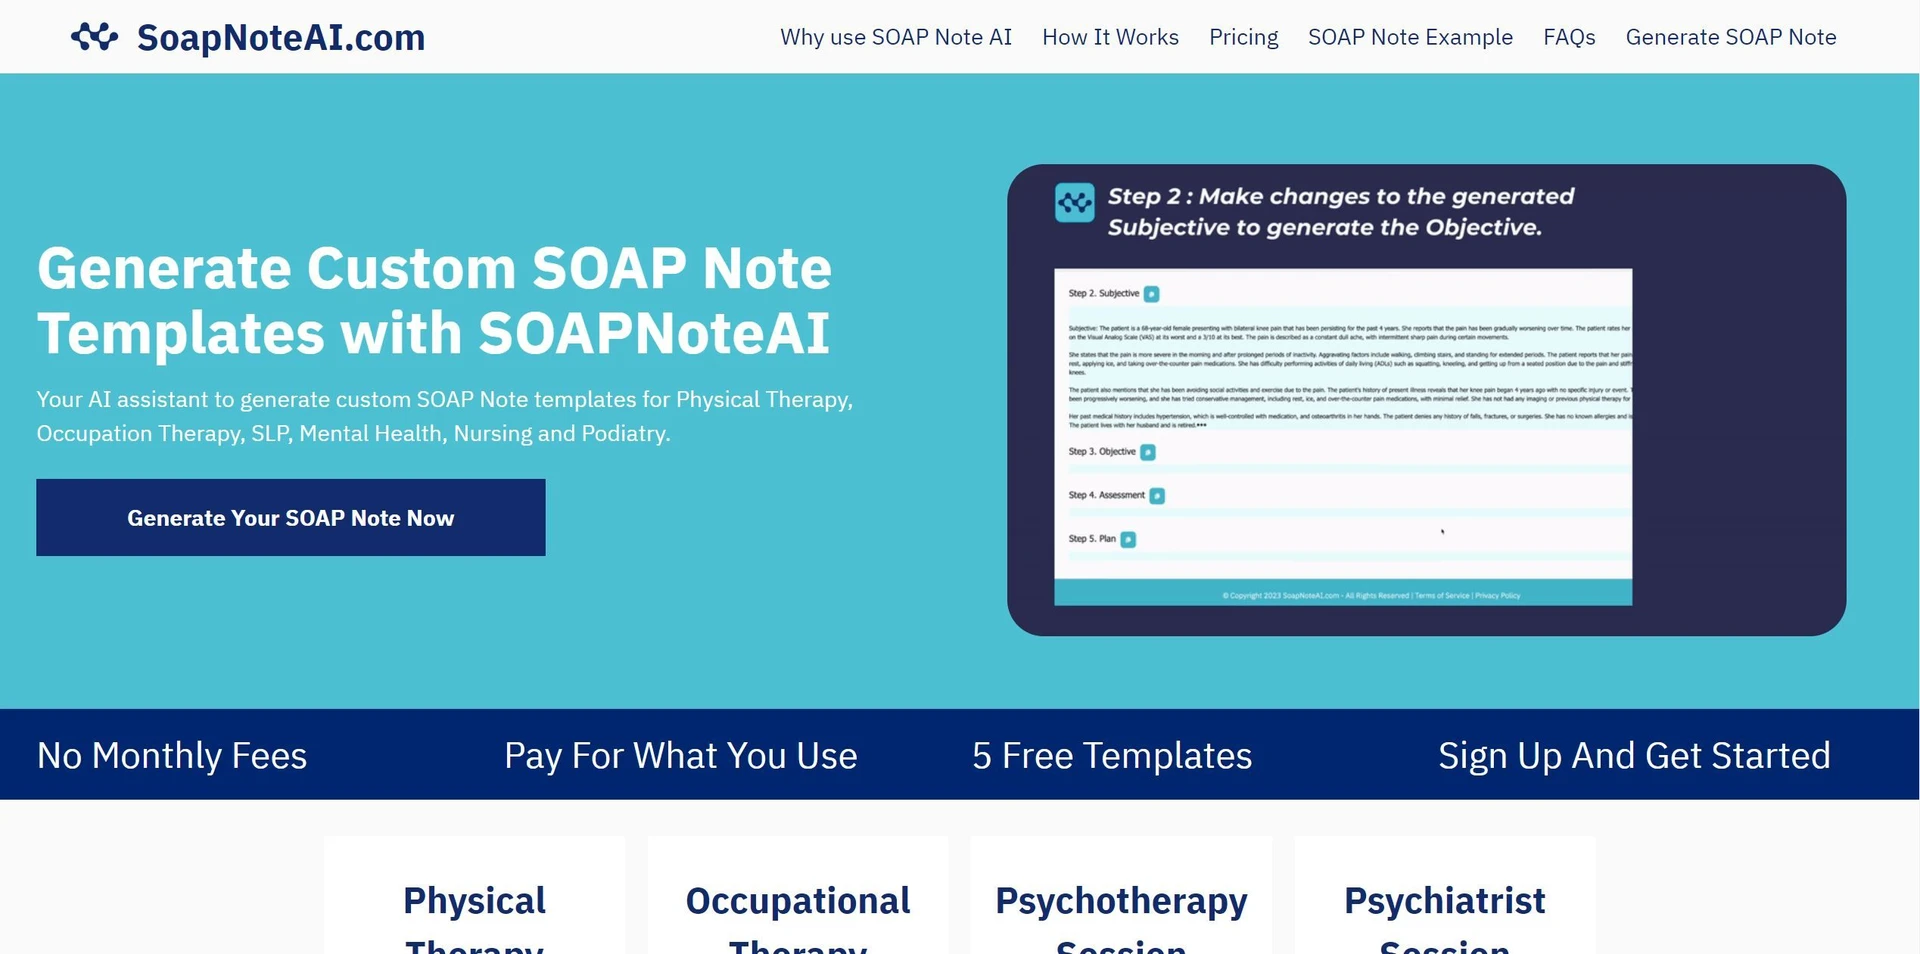 SOAP Note AIwebsite picture